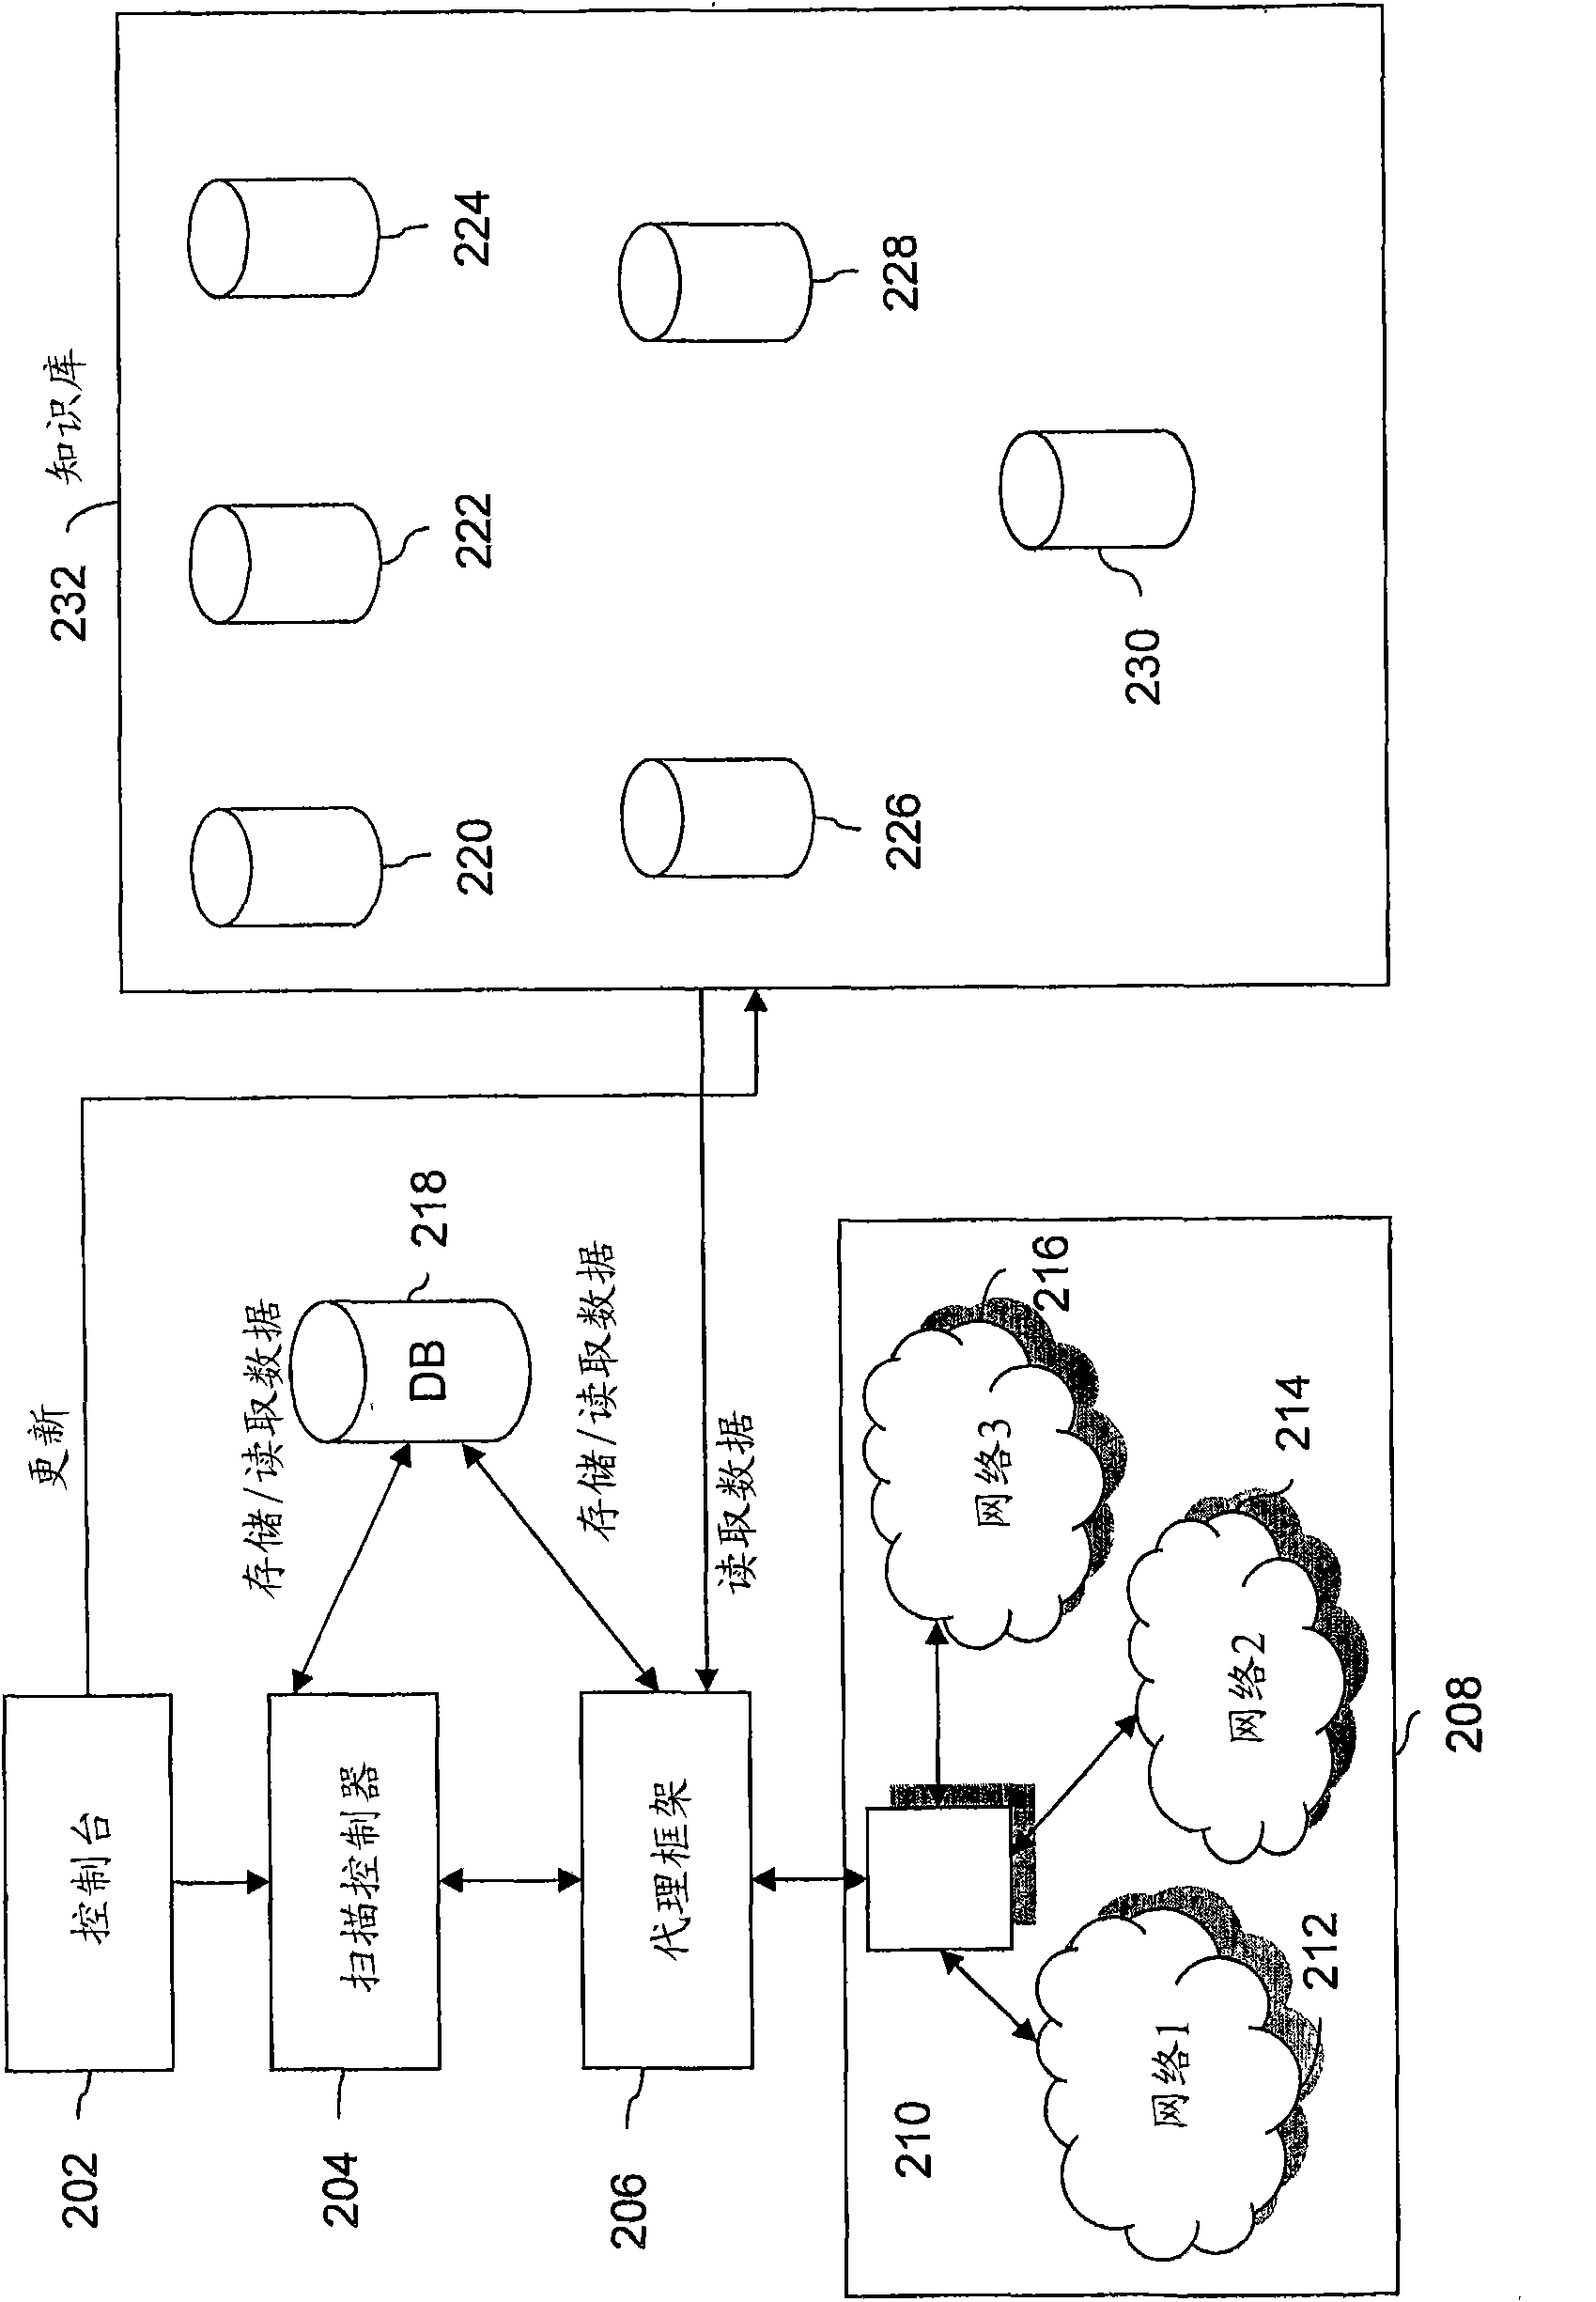 Method and system for simulating a hacking attack on a network